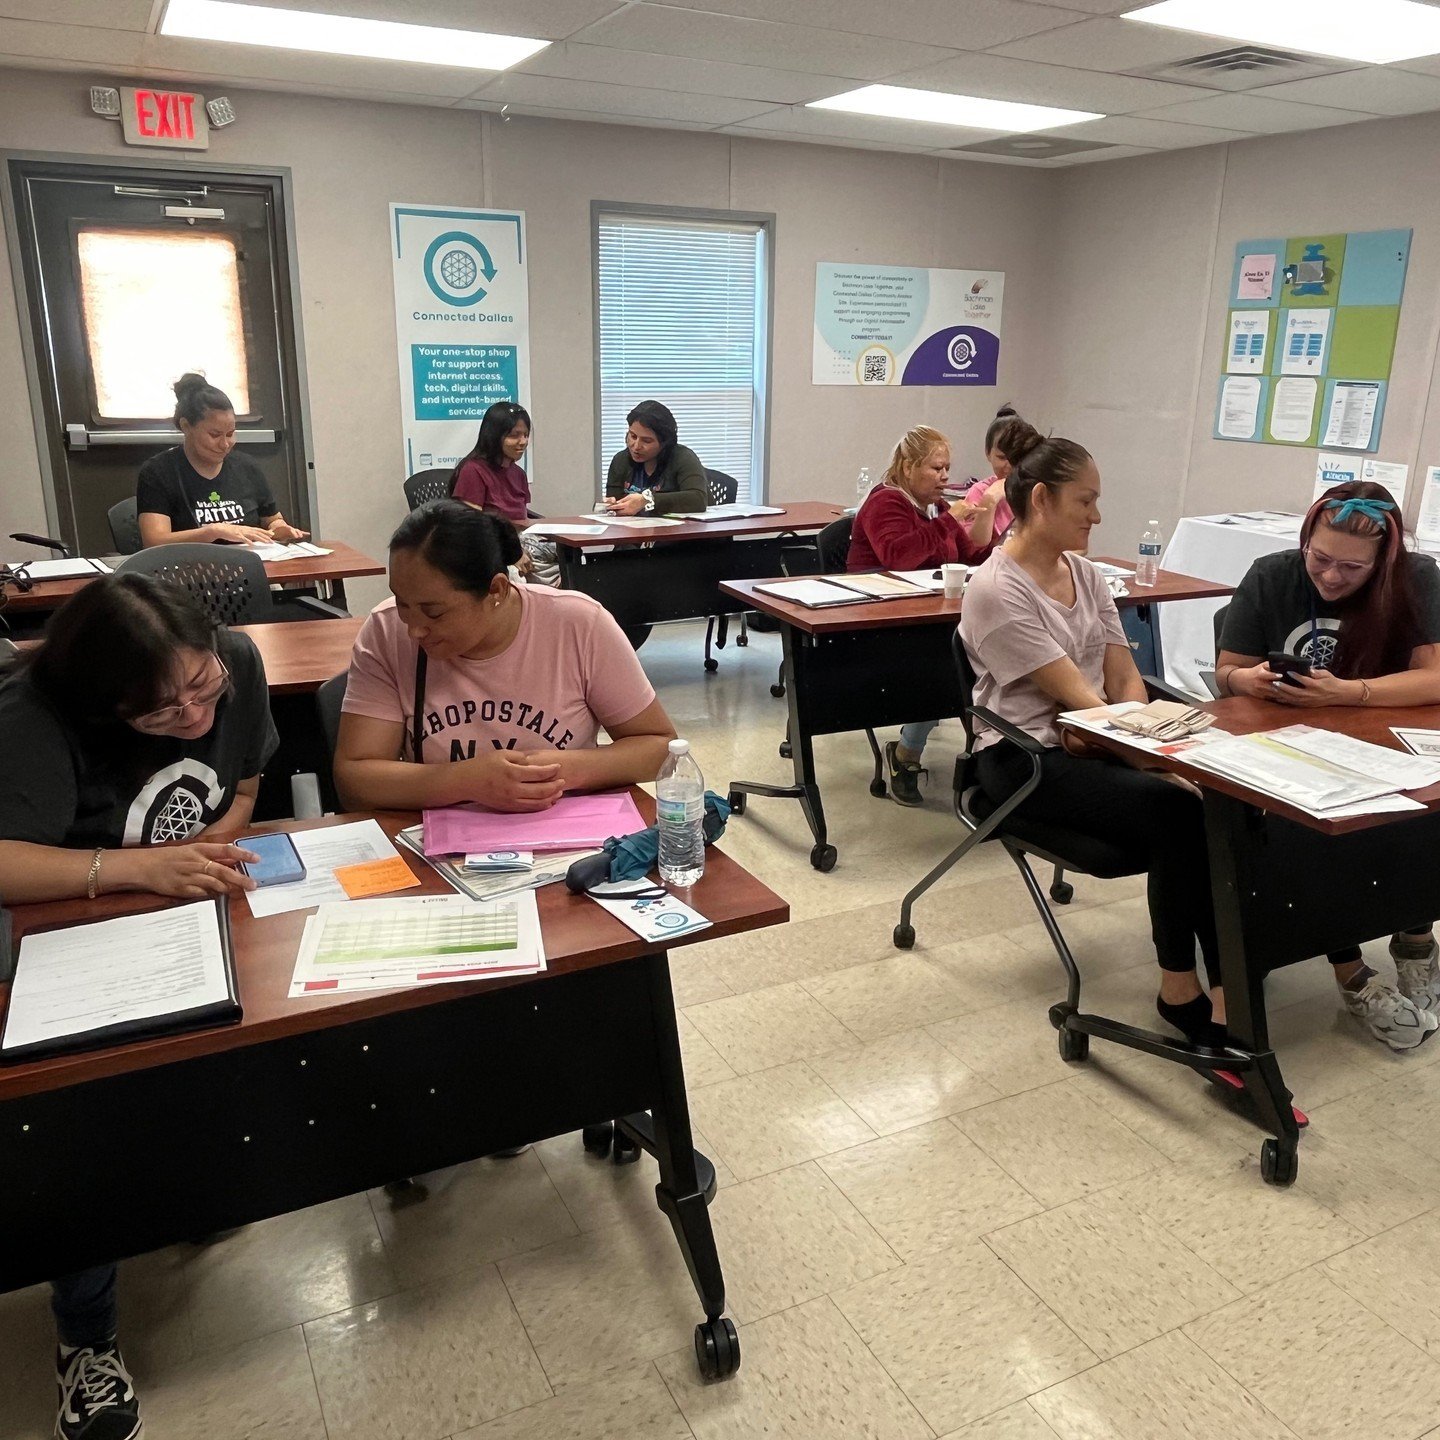 This past Saturday, dozens of families came to our Family Center to register their children for PreK! Bachman Lake Together staff, parent leaders, partners and volunteers guided families step-by-step to enroll their children for PreK and answer any q